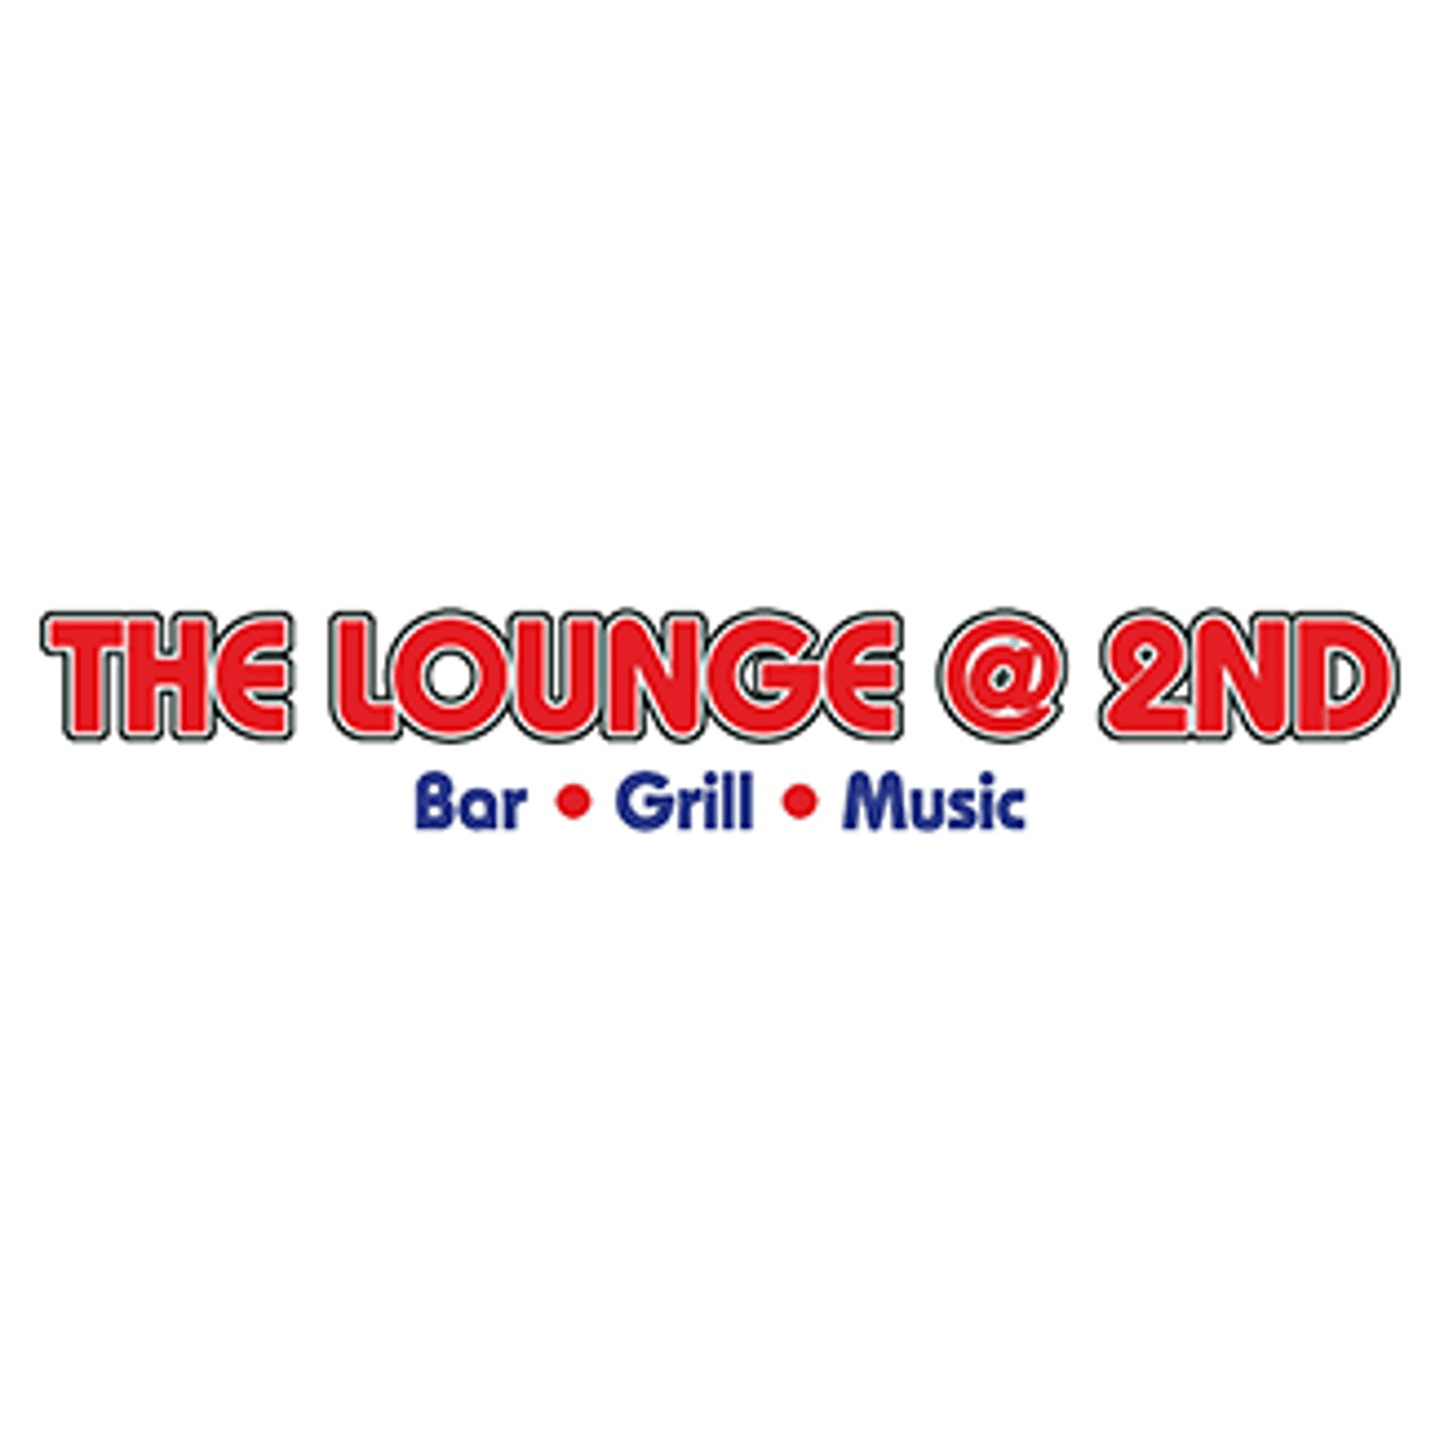 Welcome To The Lounge @ 2nd